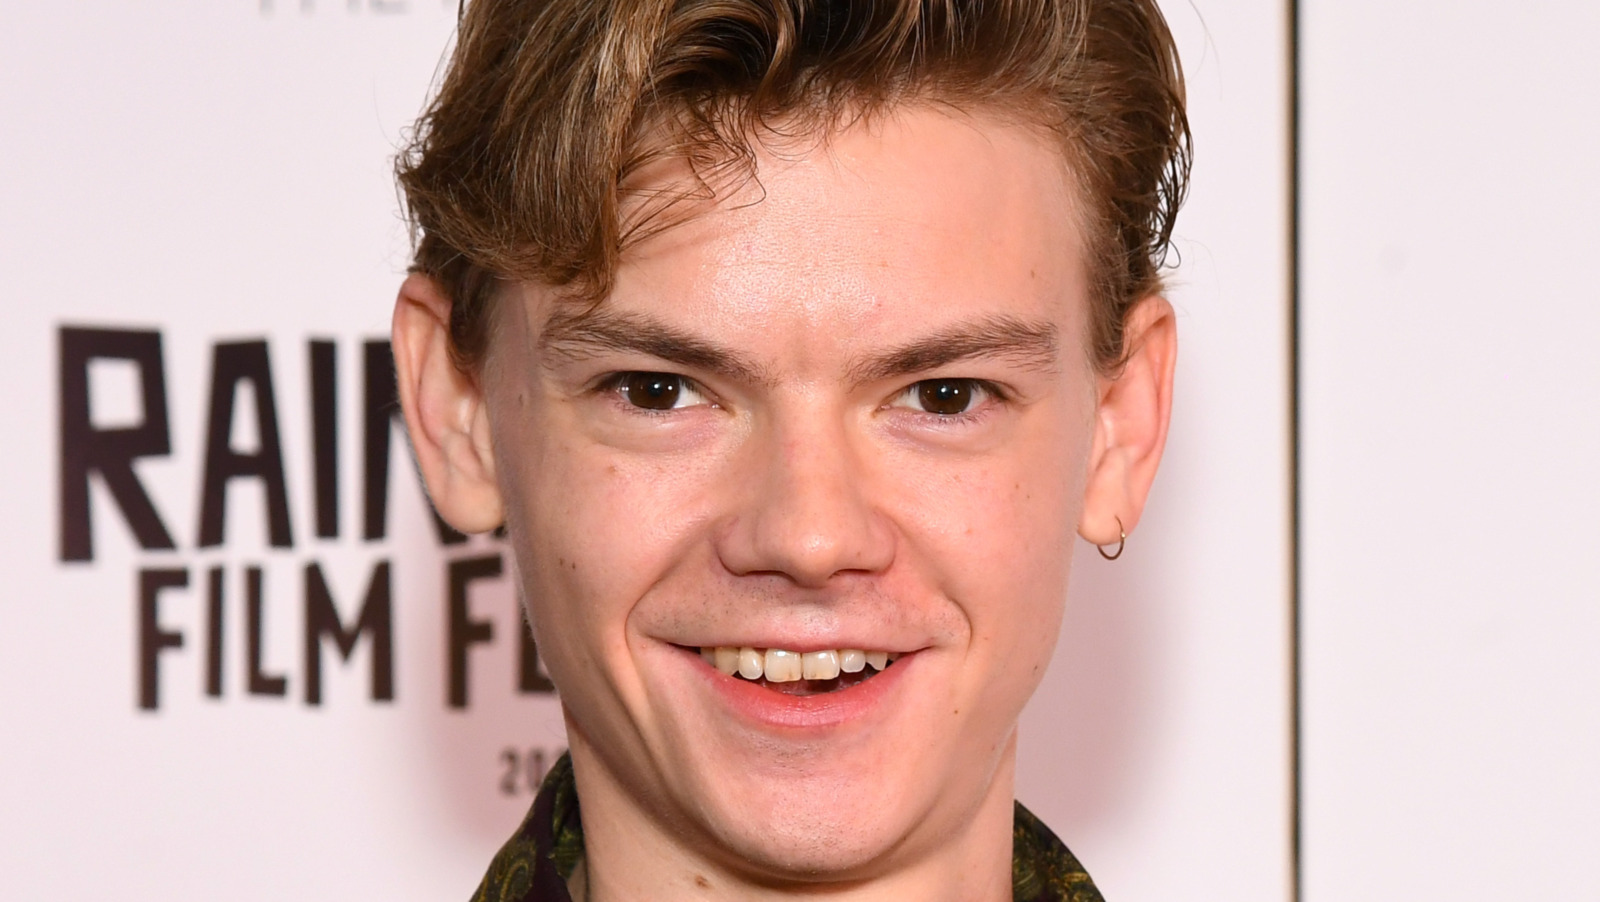 Benny Watts or Thomas Brodie-Sangster Music-loving actor plays